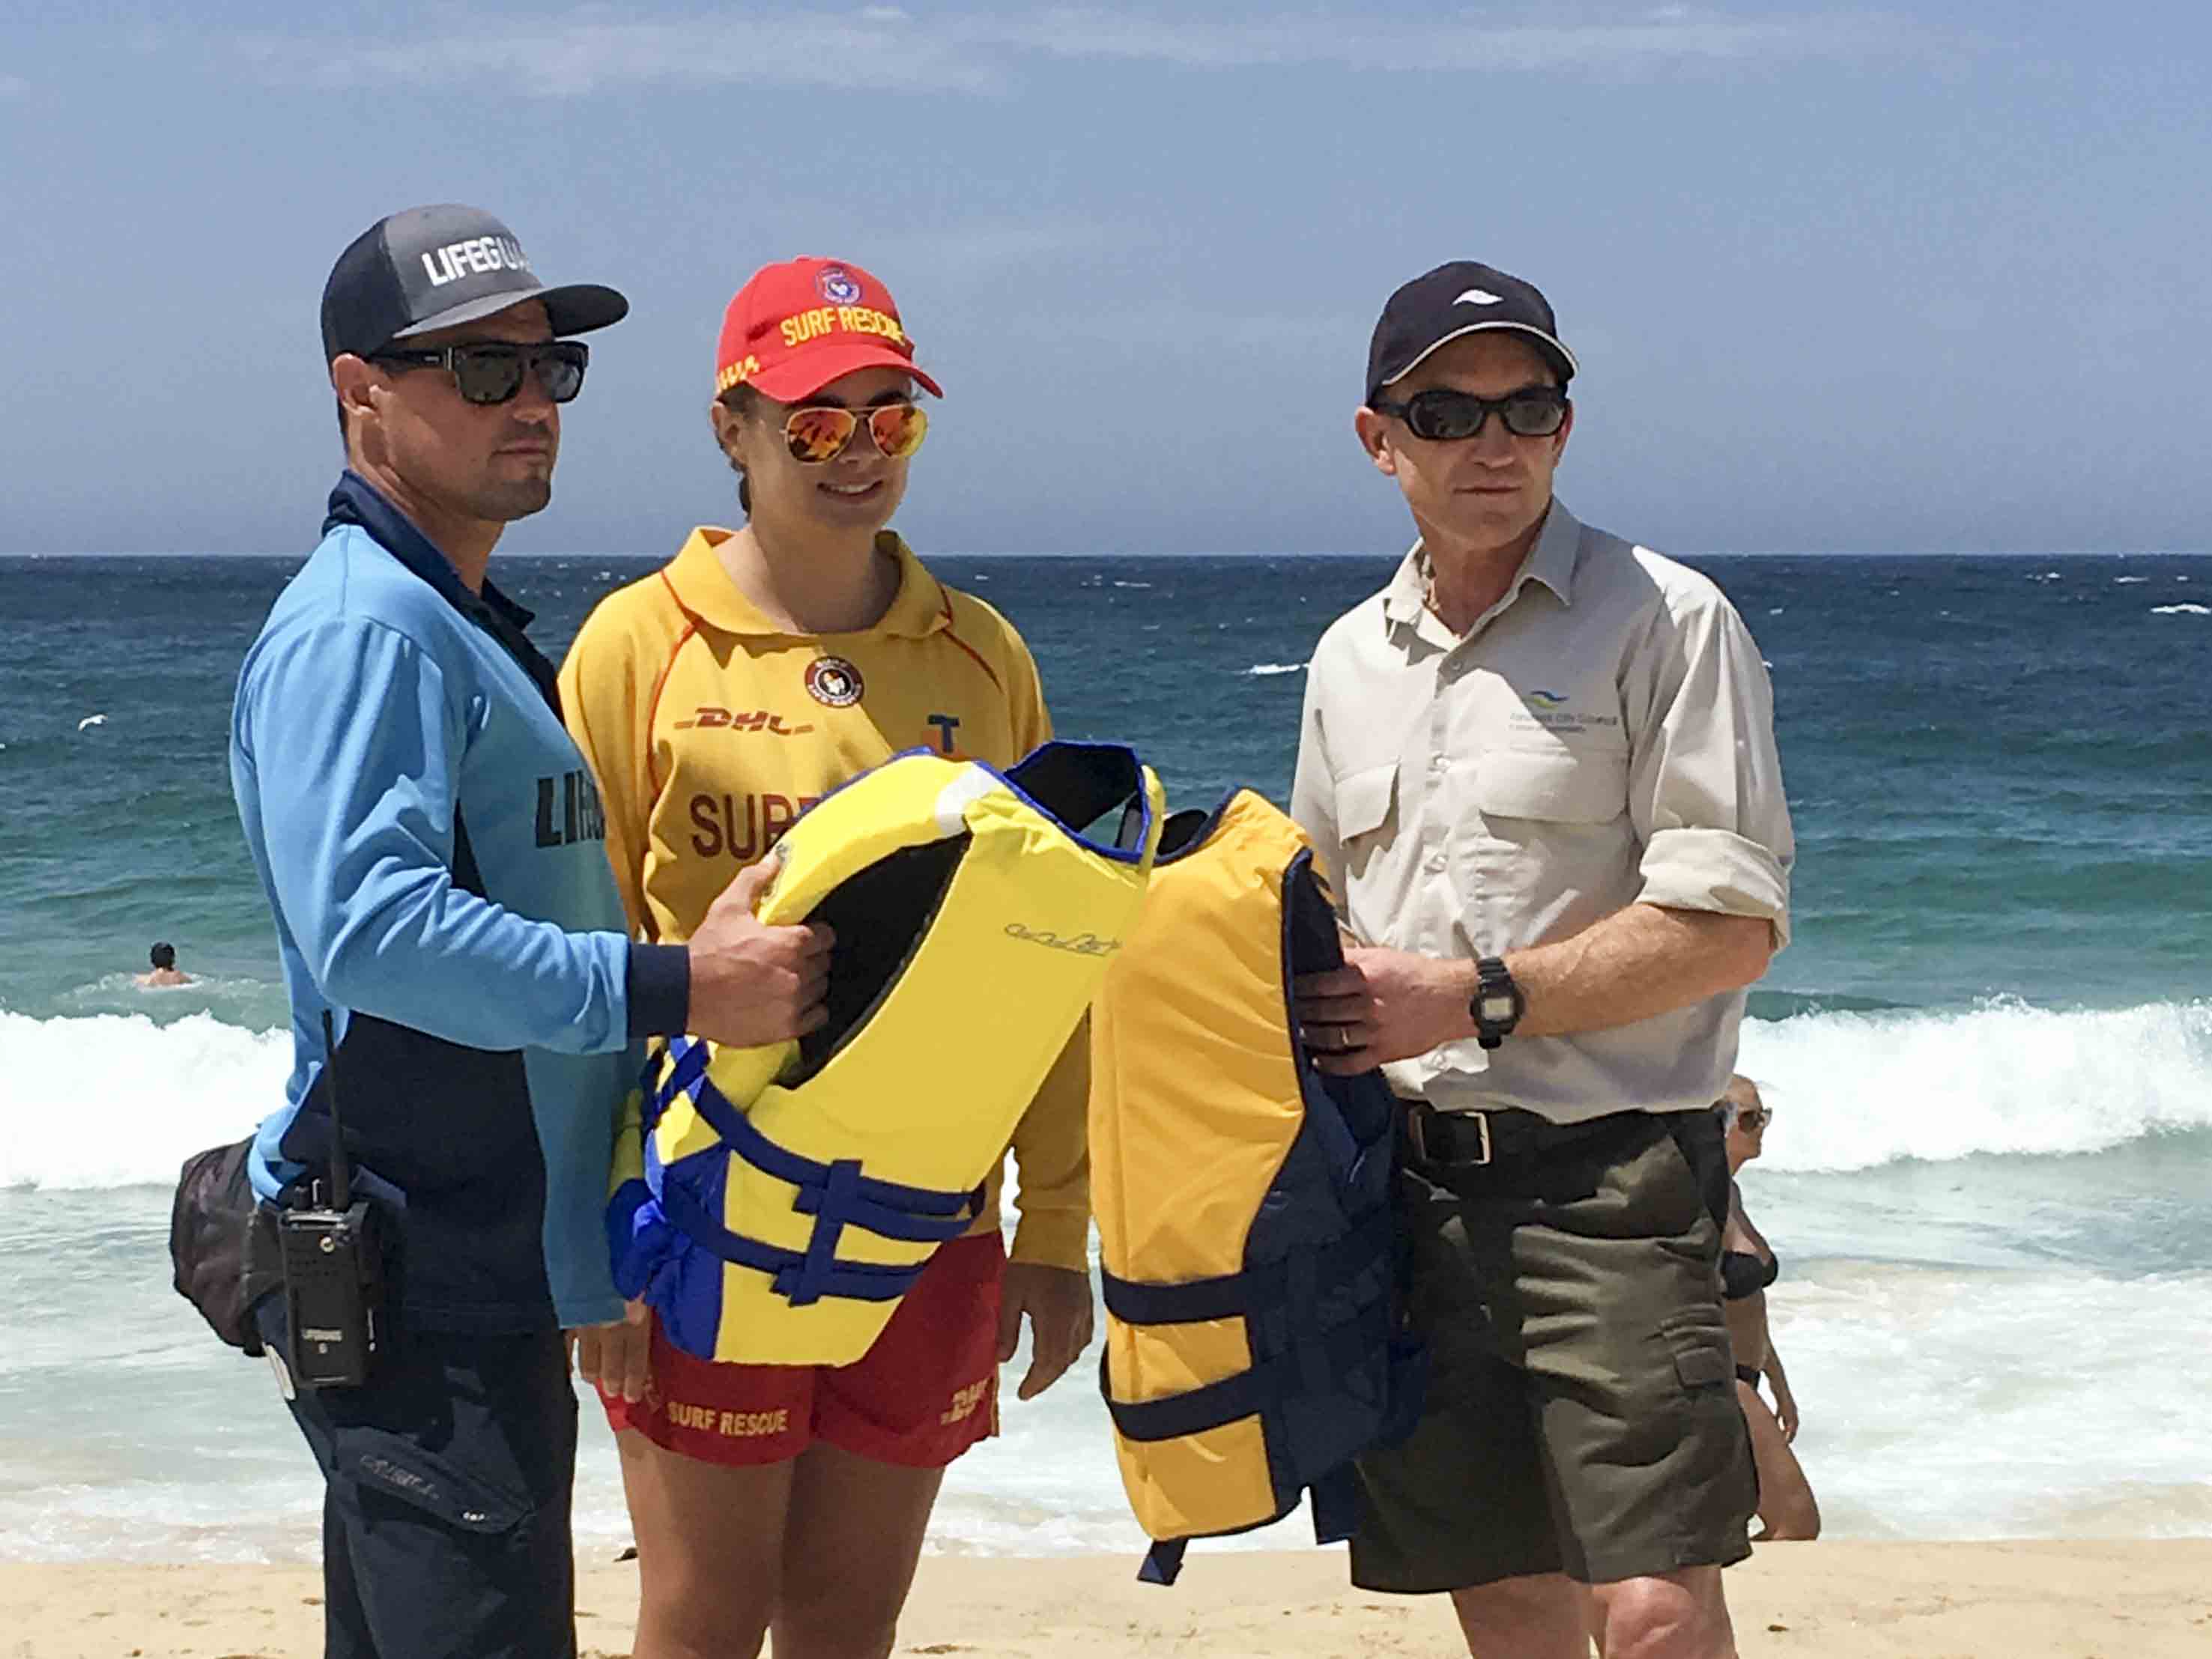 Council staff on Coogee Beach for the Water Safety Expo